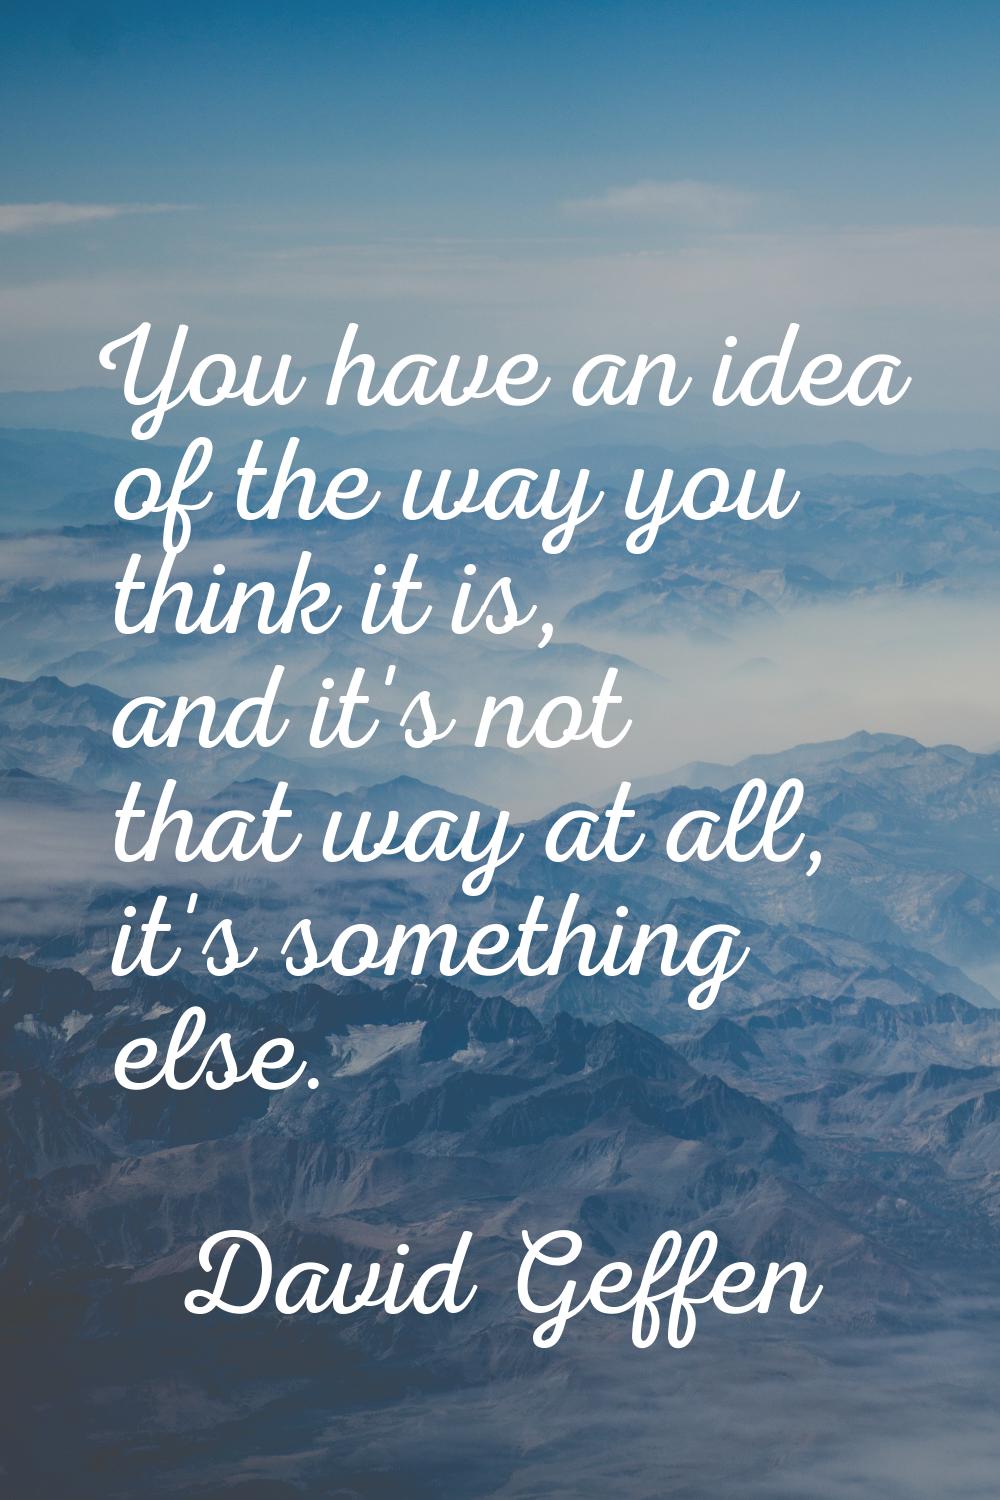 You have an idea of the way you think it is, and it's not that way at all, it's something else.